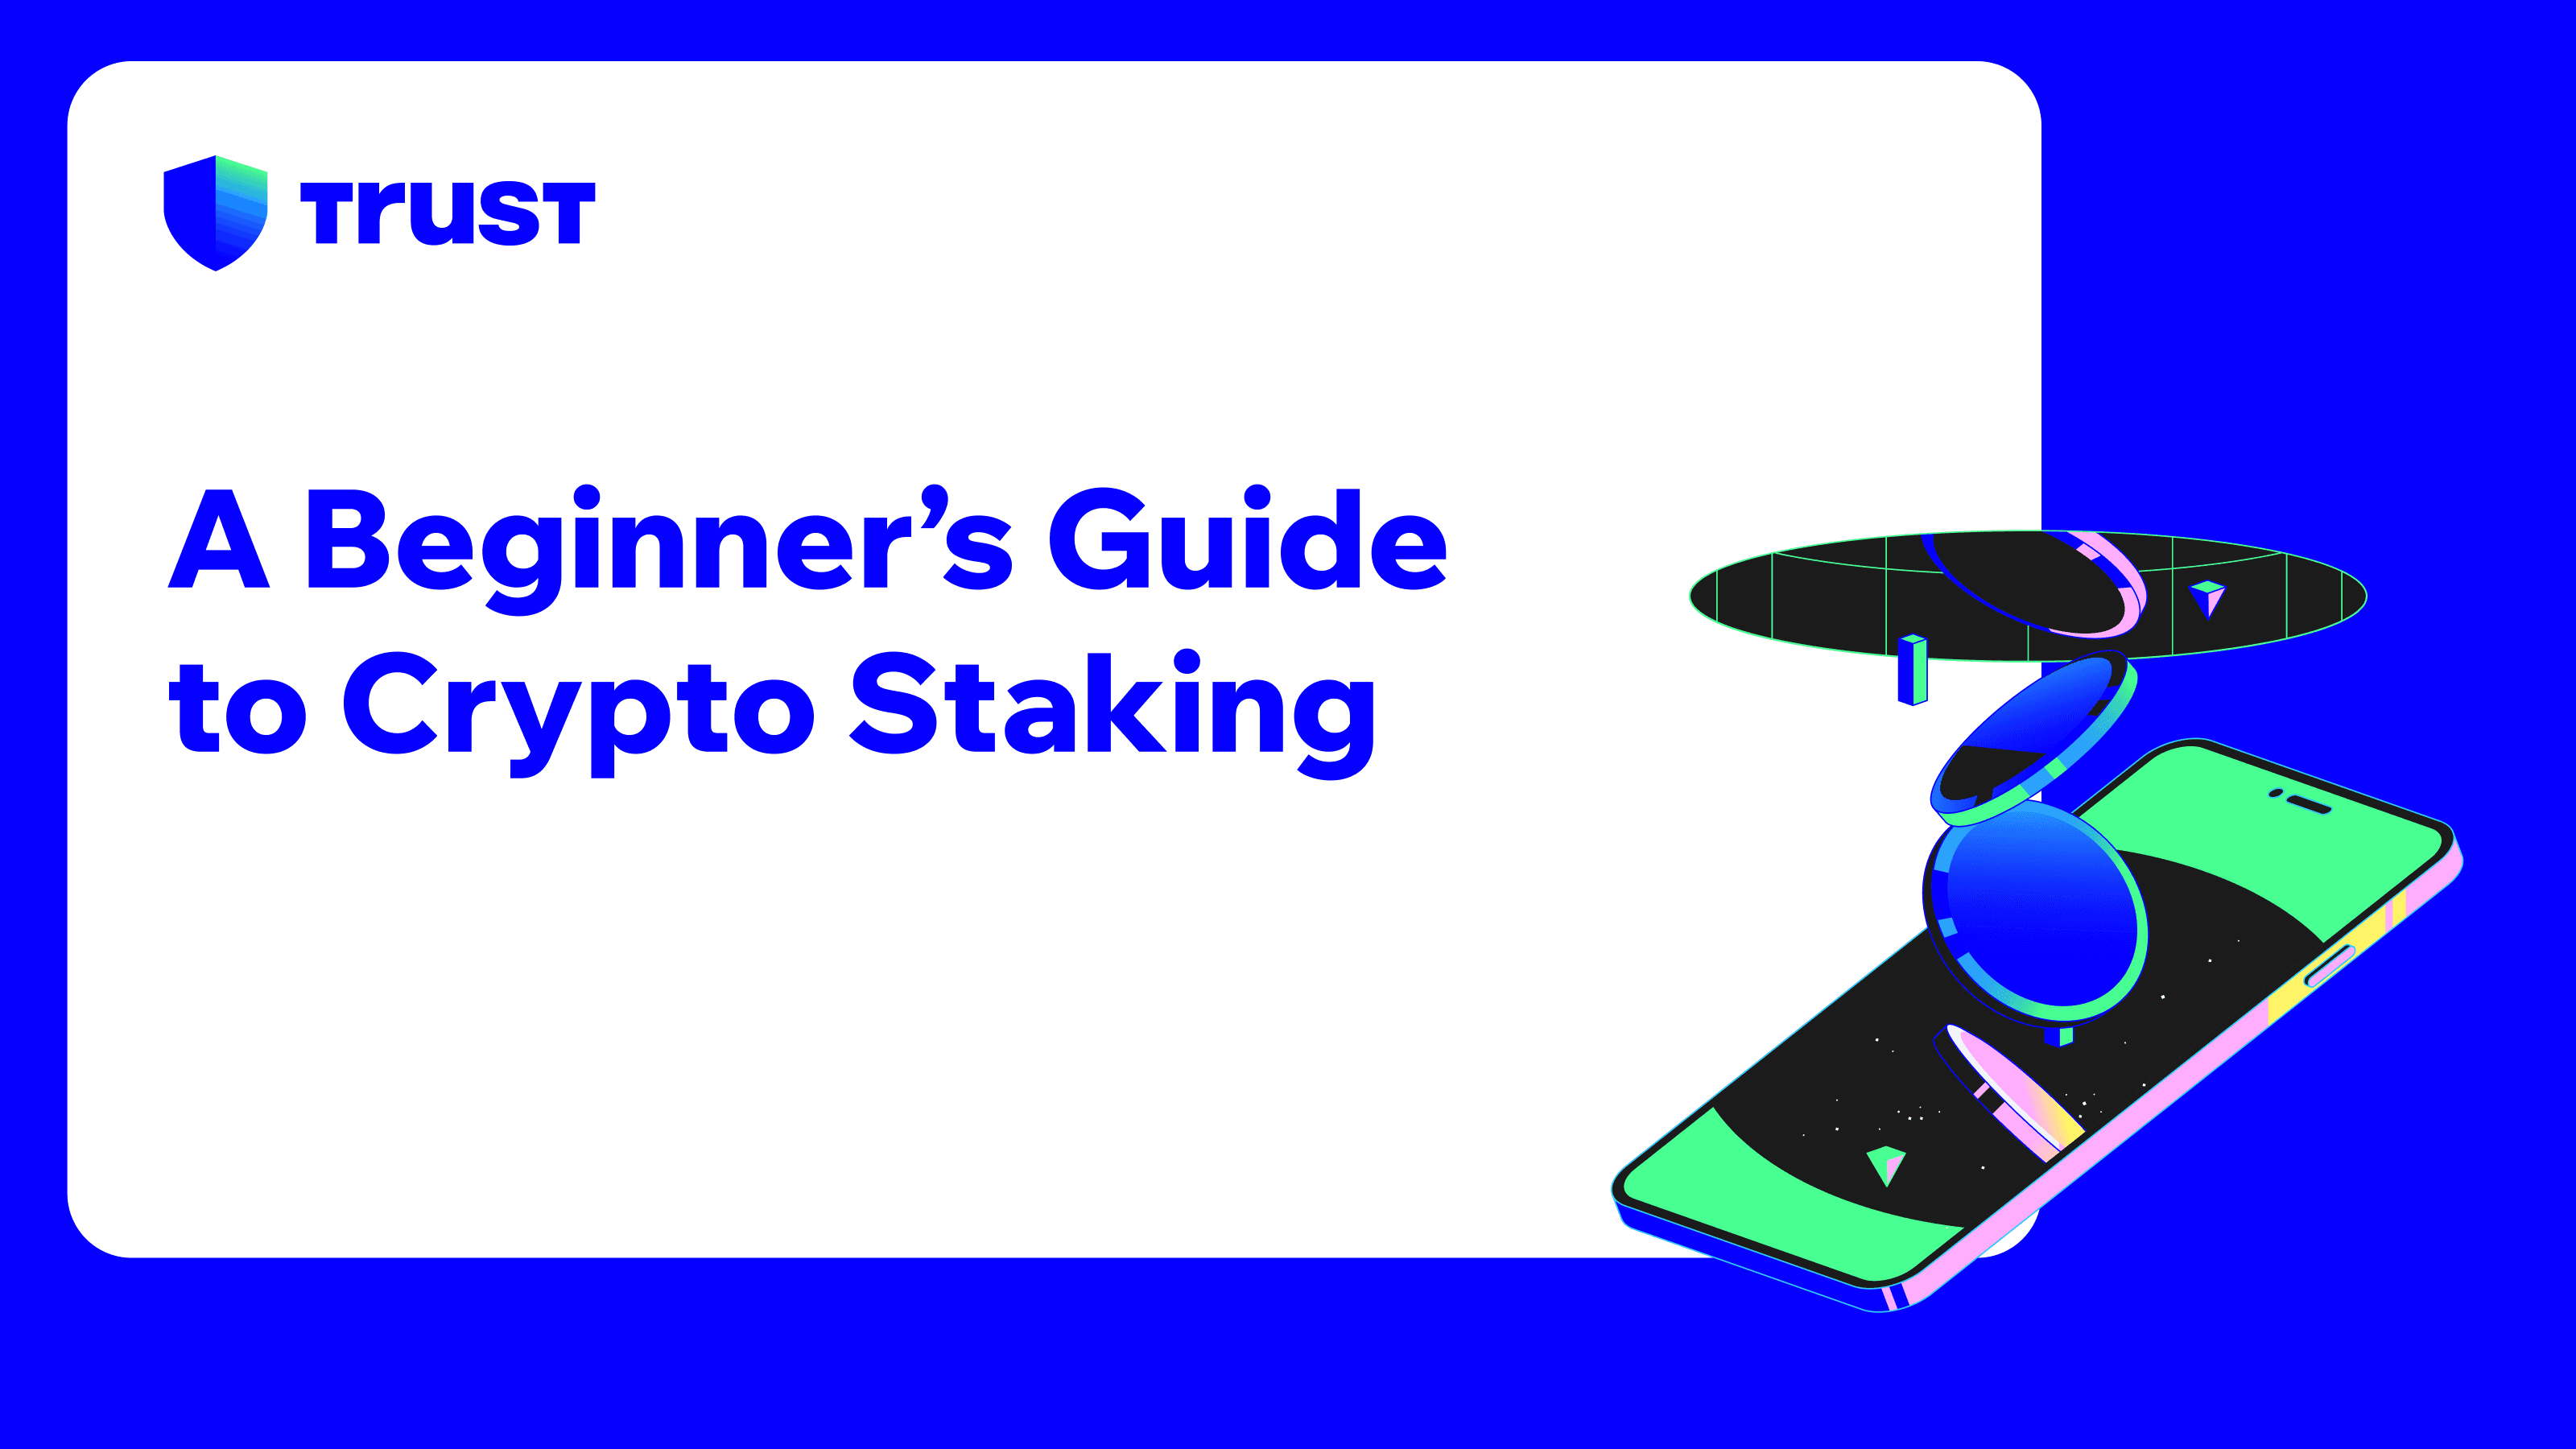 A Beginner’s Guide to Crypto Staking